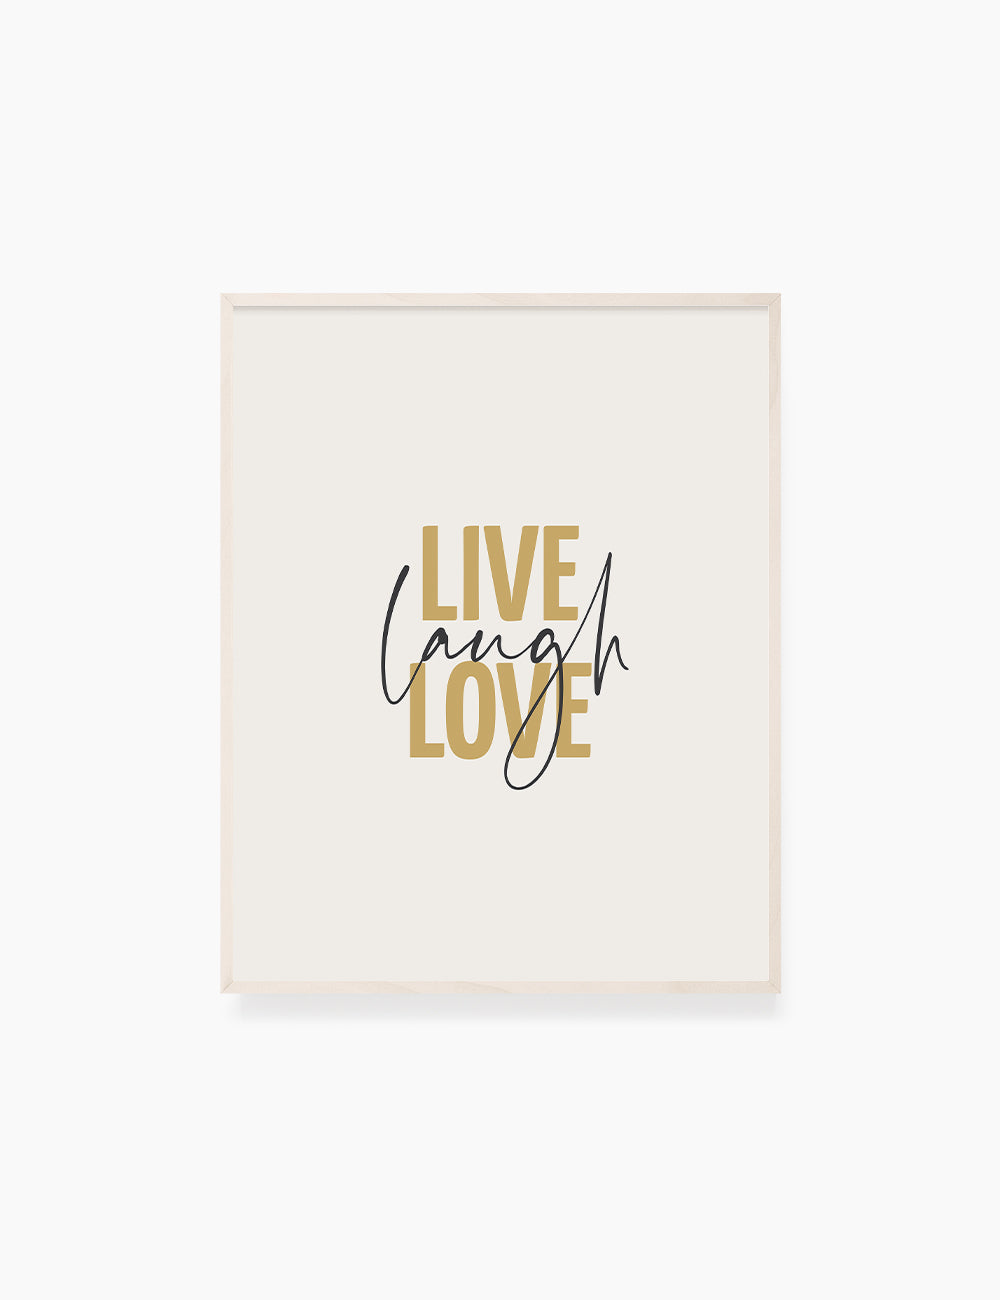 LIVE. LAUGH. LOVE. Yellow Gold. Beige. Inspirational quote. Printable Wall Art Quote. - PAPER MOON Art & Design